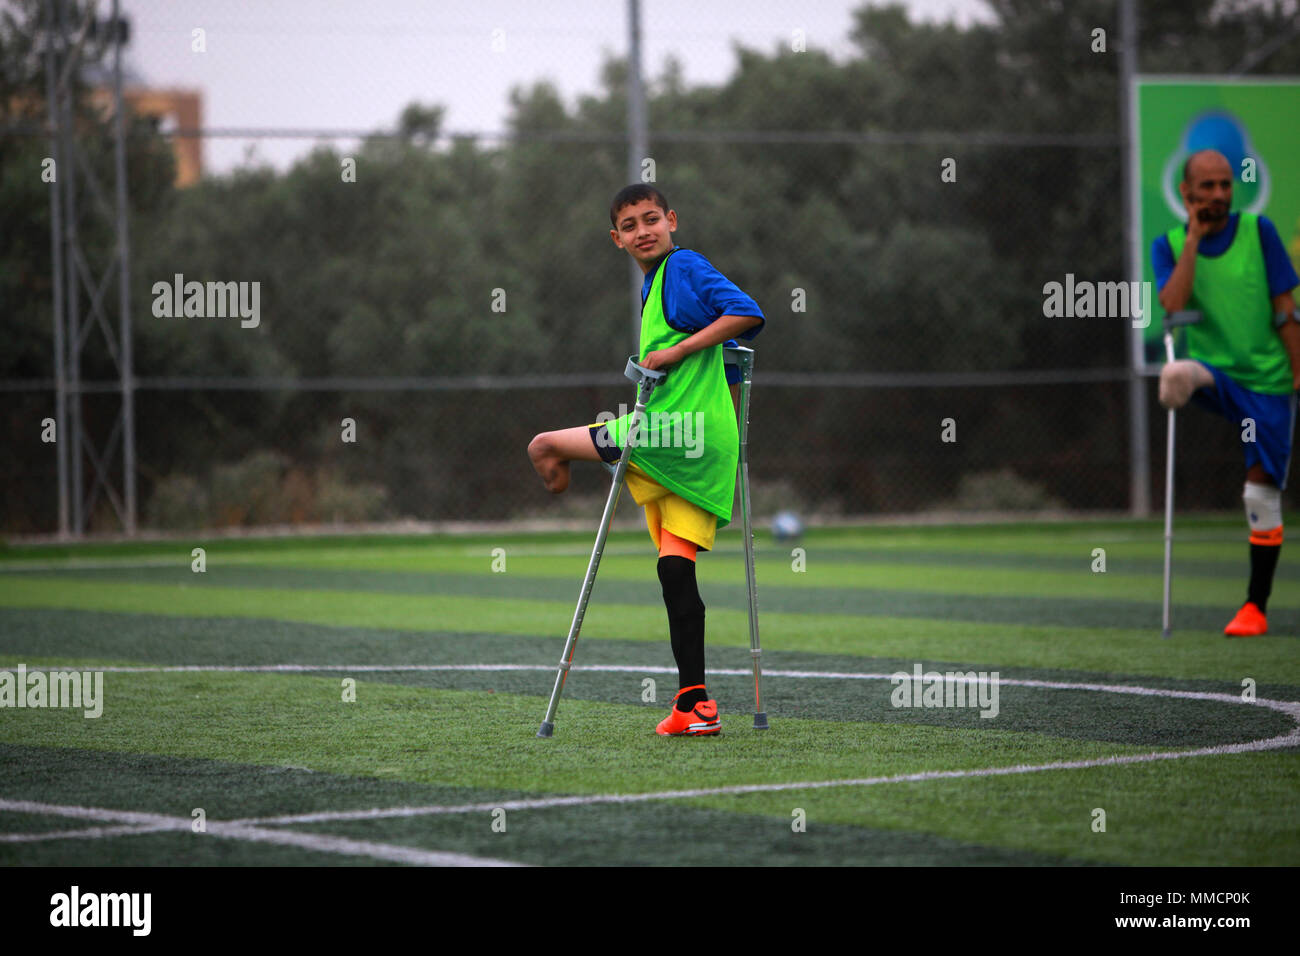 Gaza. 10th May, 2018. A Palestinian amputee soccer player exercises during a training session of their team at Municipality Stadium in Deir Al Balah, in the central Gaza Strip, on May 10, 2018. For the first time in the Palestinian Gaza Strip, a football team of male amputees was recently formed to lay the foundation for such a sport in the Israeli-blockaded territory. The 12-player team, named 'The Heroes', could be a glimmer of hope for many young people with amputations caused by frequent rounds of violence with Israel and other accidents. Credit: Stringer/Xinhua/Alamy Live News Stock Photo